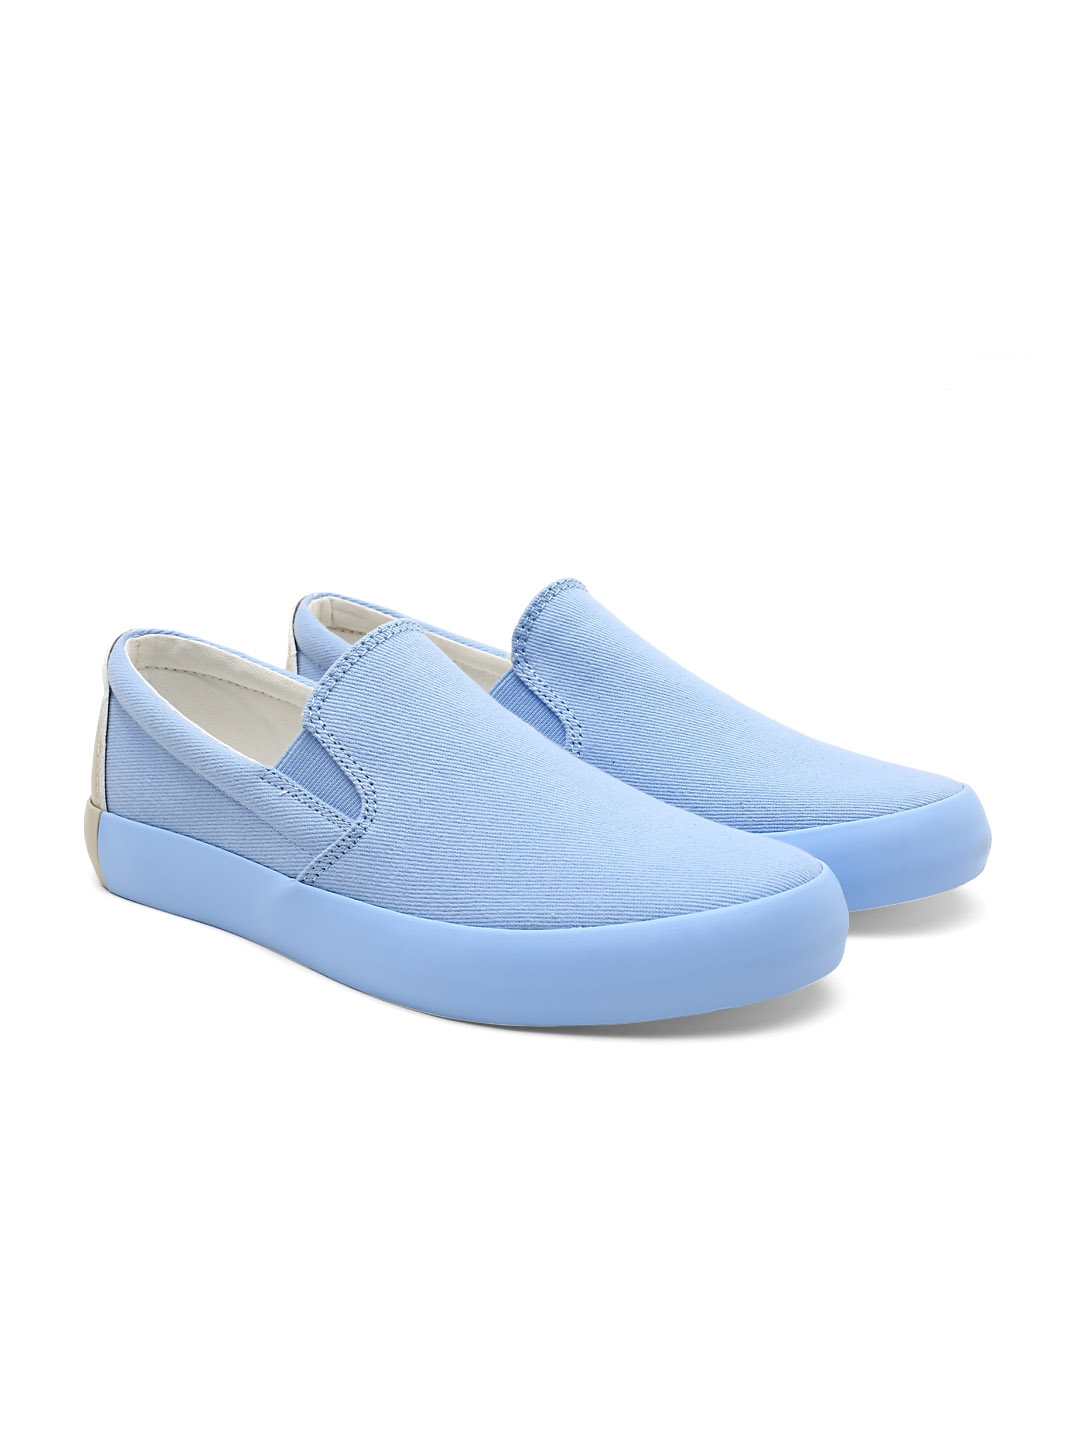 Buy United Colors Of Benetton Men Blue Slip On Sneakers - Casual Shoes ...